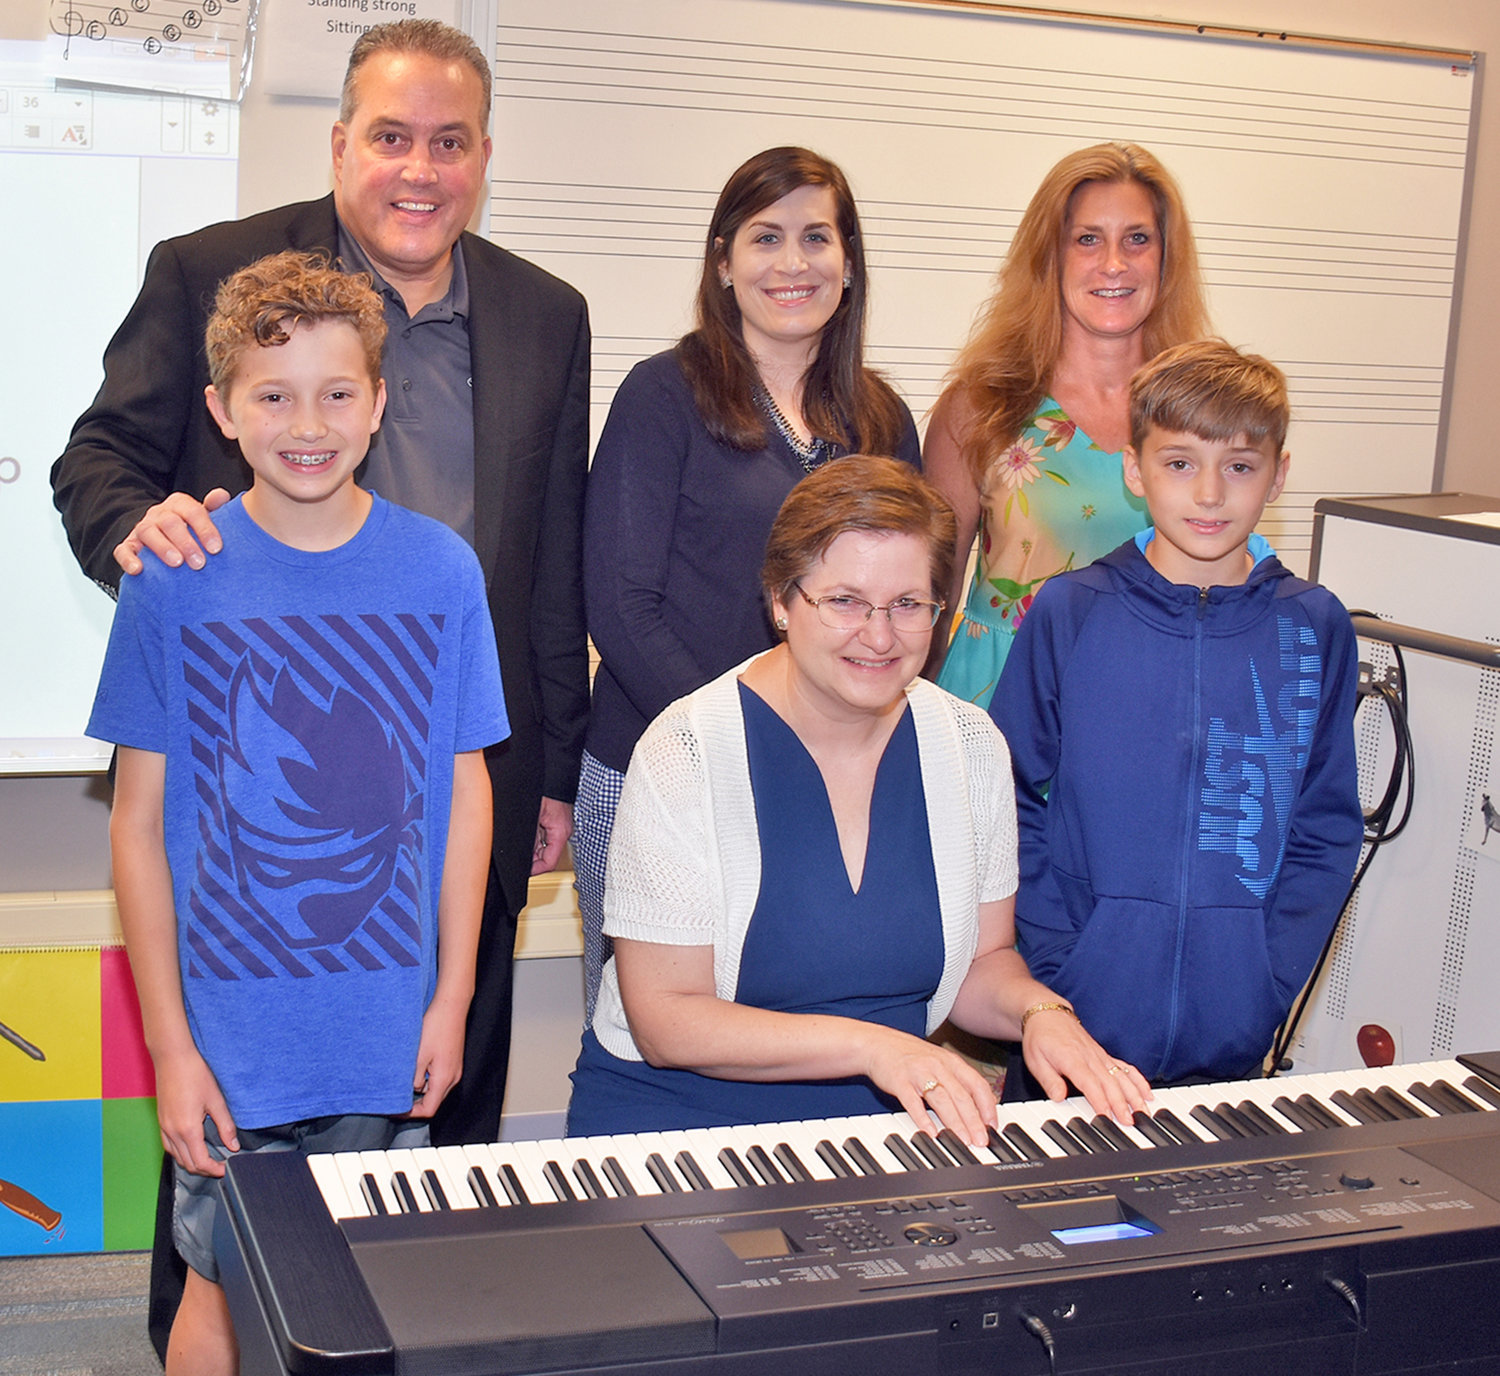 ELECTRIC PIANO DONATION — Shown with an electric piano that was donated to Joy Elementary School, in back at left: Rick Zuccaro, who made the donation and is an area musician and general manager at Carbone Subaru of Utica; school district Director of Fine Arts and Engineering Andrea Falvo; Joy school Principal Andrea Lacey. In front, from left: Joseph (Joey) Fiorini, sixth-grader; Joy school music teacher Diane Vicik; Anthony (AJ) Fiorini, fourth-grader. The Fiorinis are the grandsons of Dave Fiorini of the Carbone Auto Group, who also was instrumental in getting the piano donated.